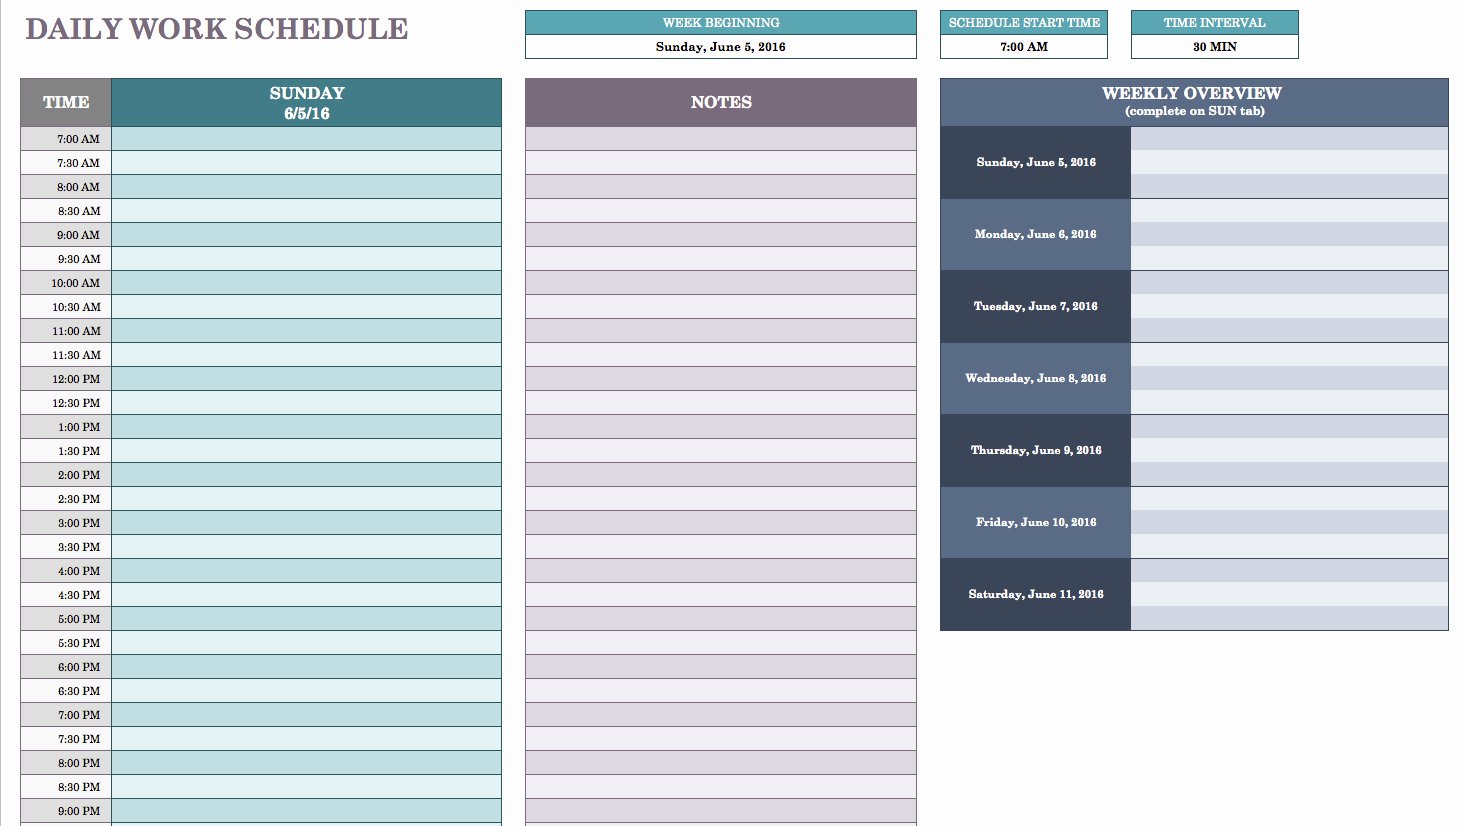 Free Daily Schedule Templates for Excel Smartsheet